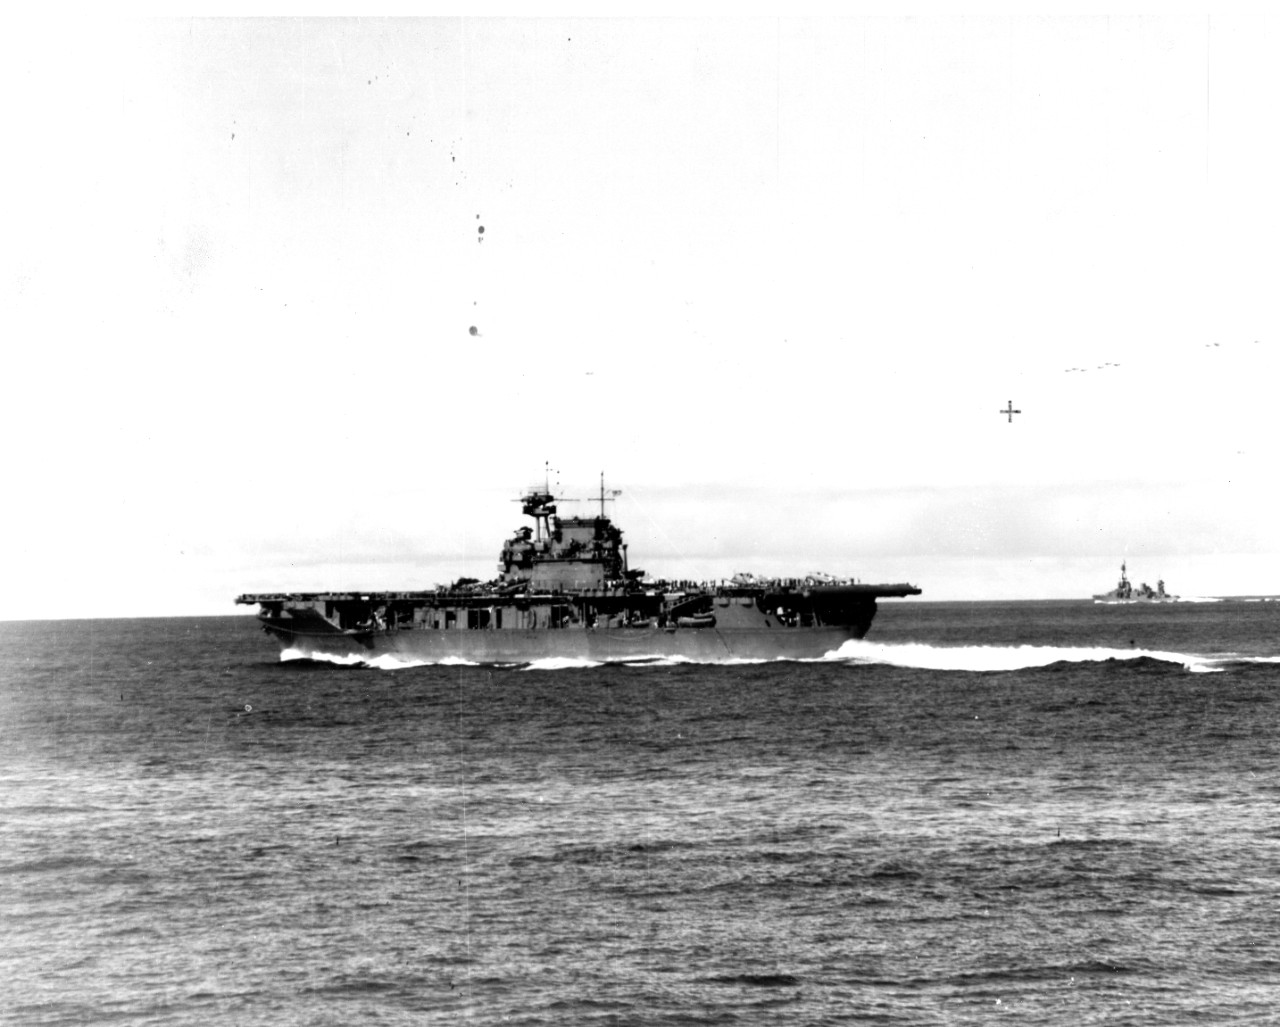 Photo #: 80-G-32225  Battle of Midway, June 1942